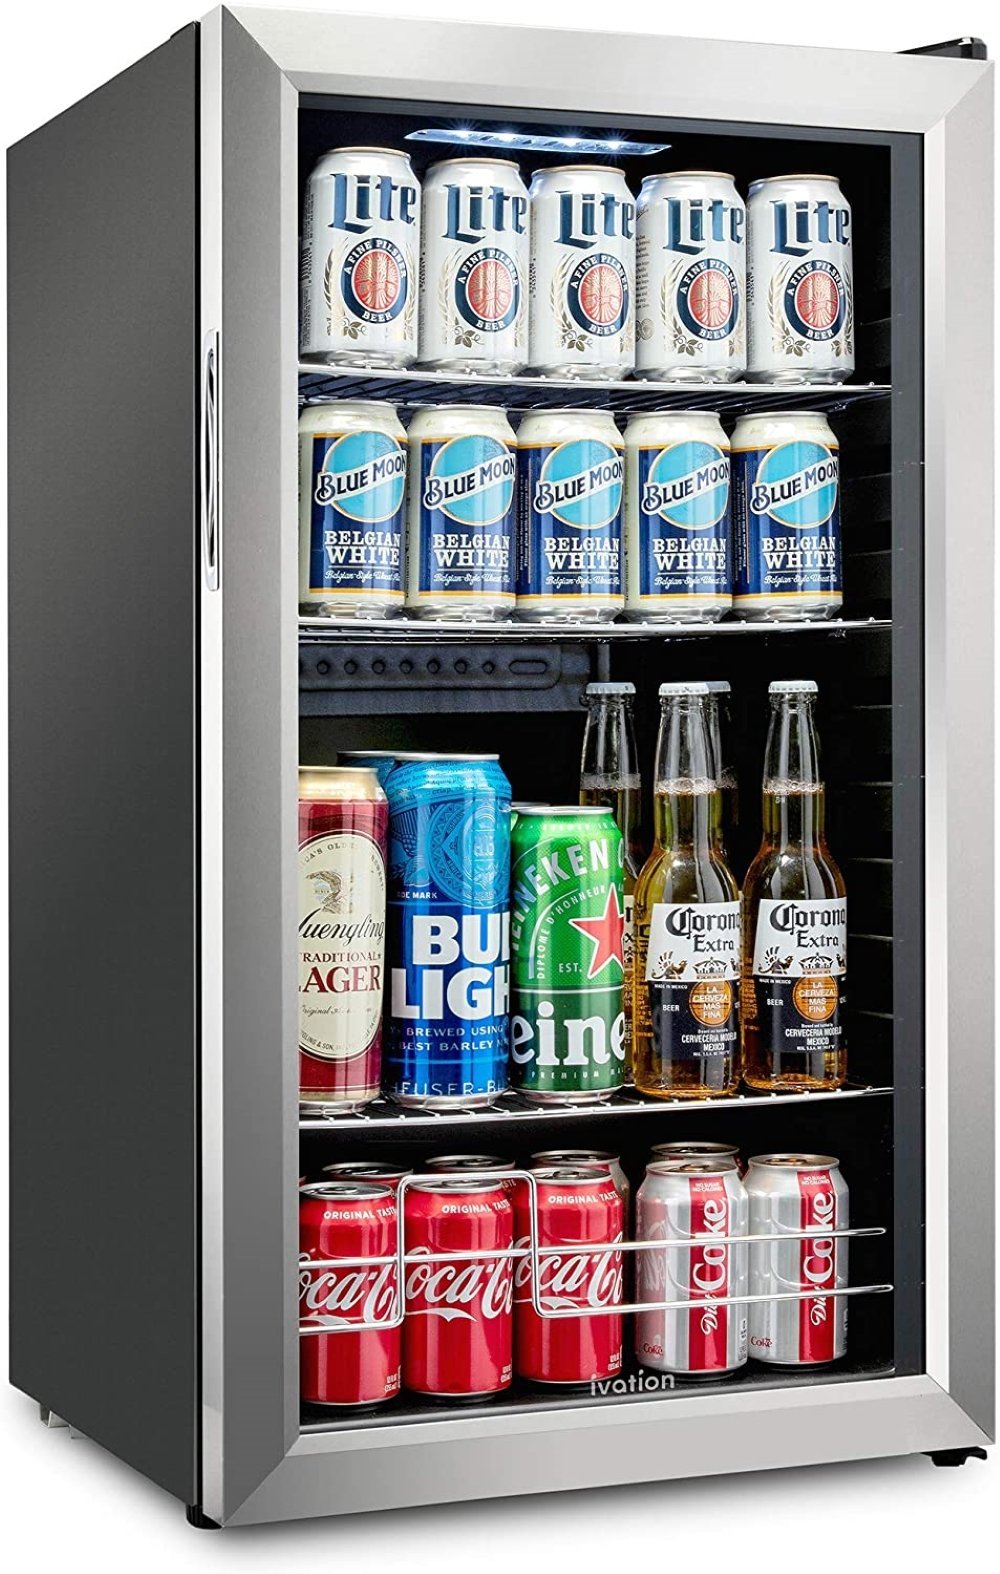 Ivation 126-Can Beverage Refrigerator ,Stainless Steel